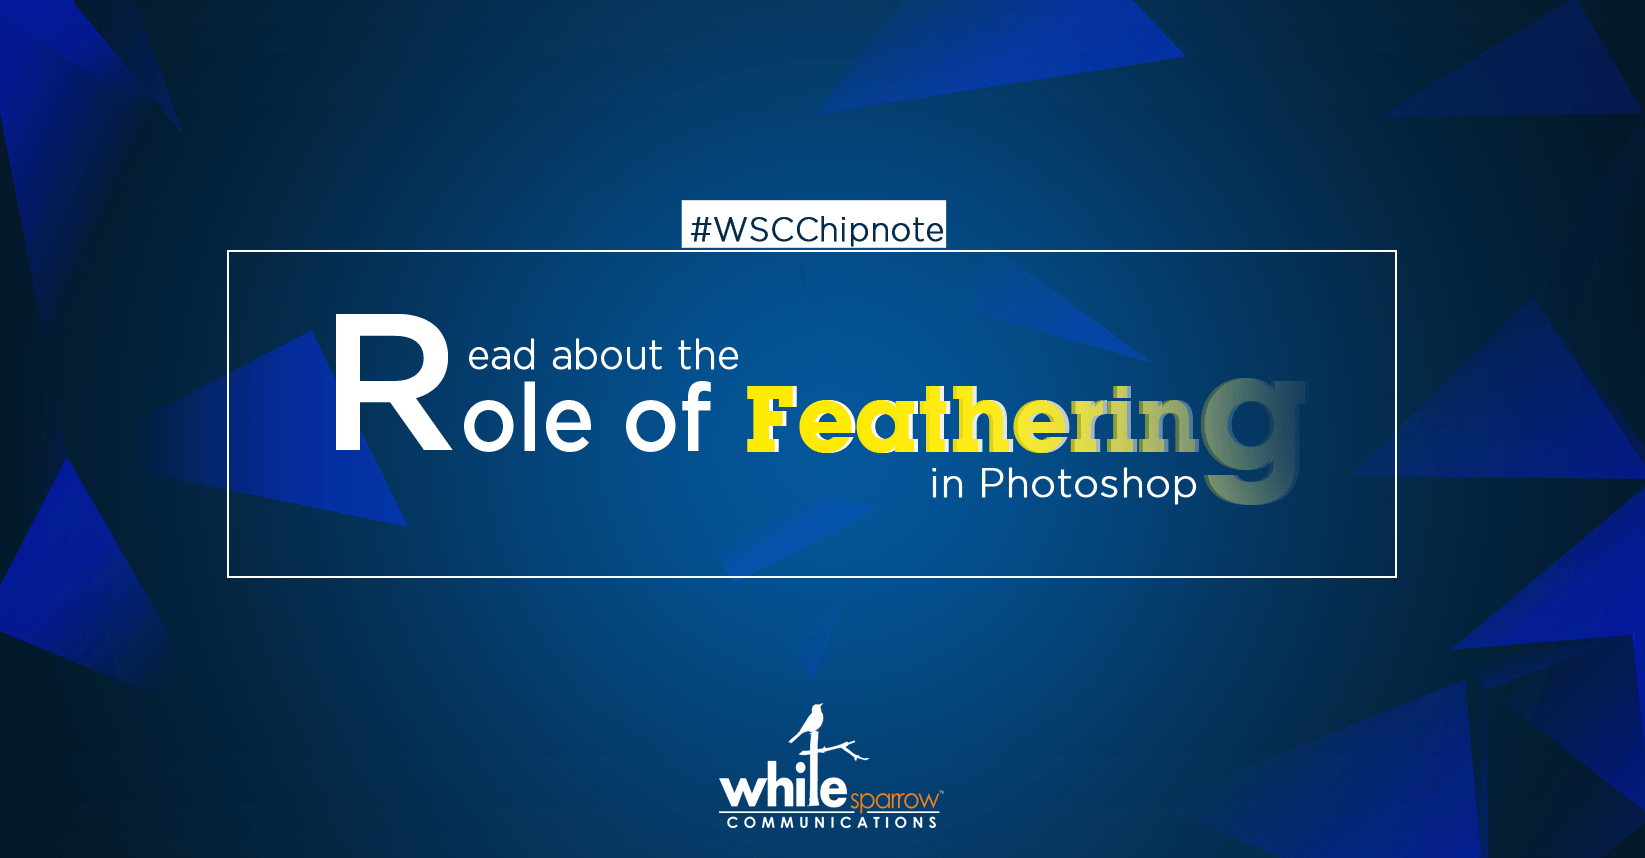 Role of feathering in Photoshop